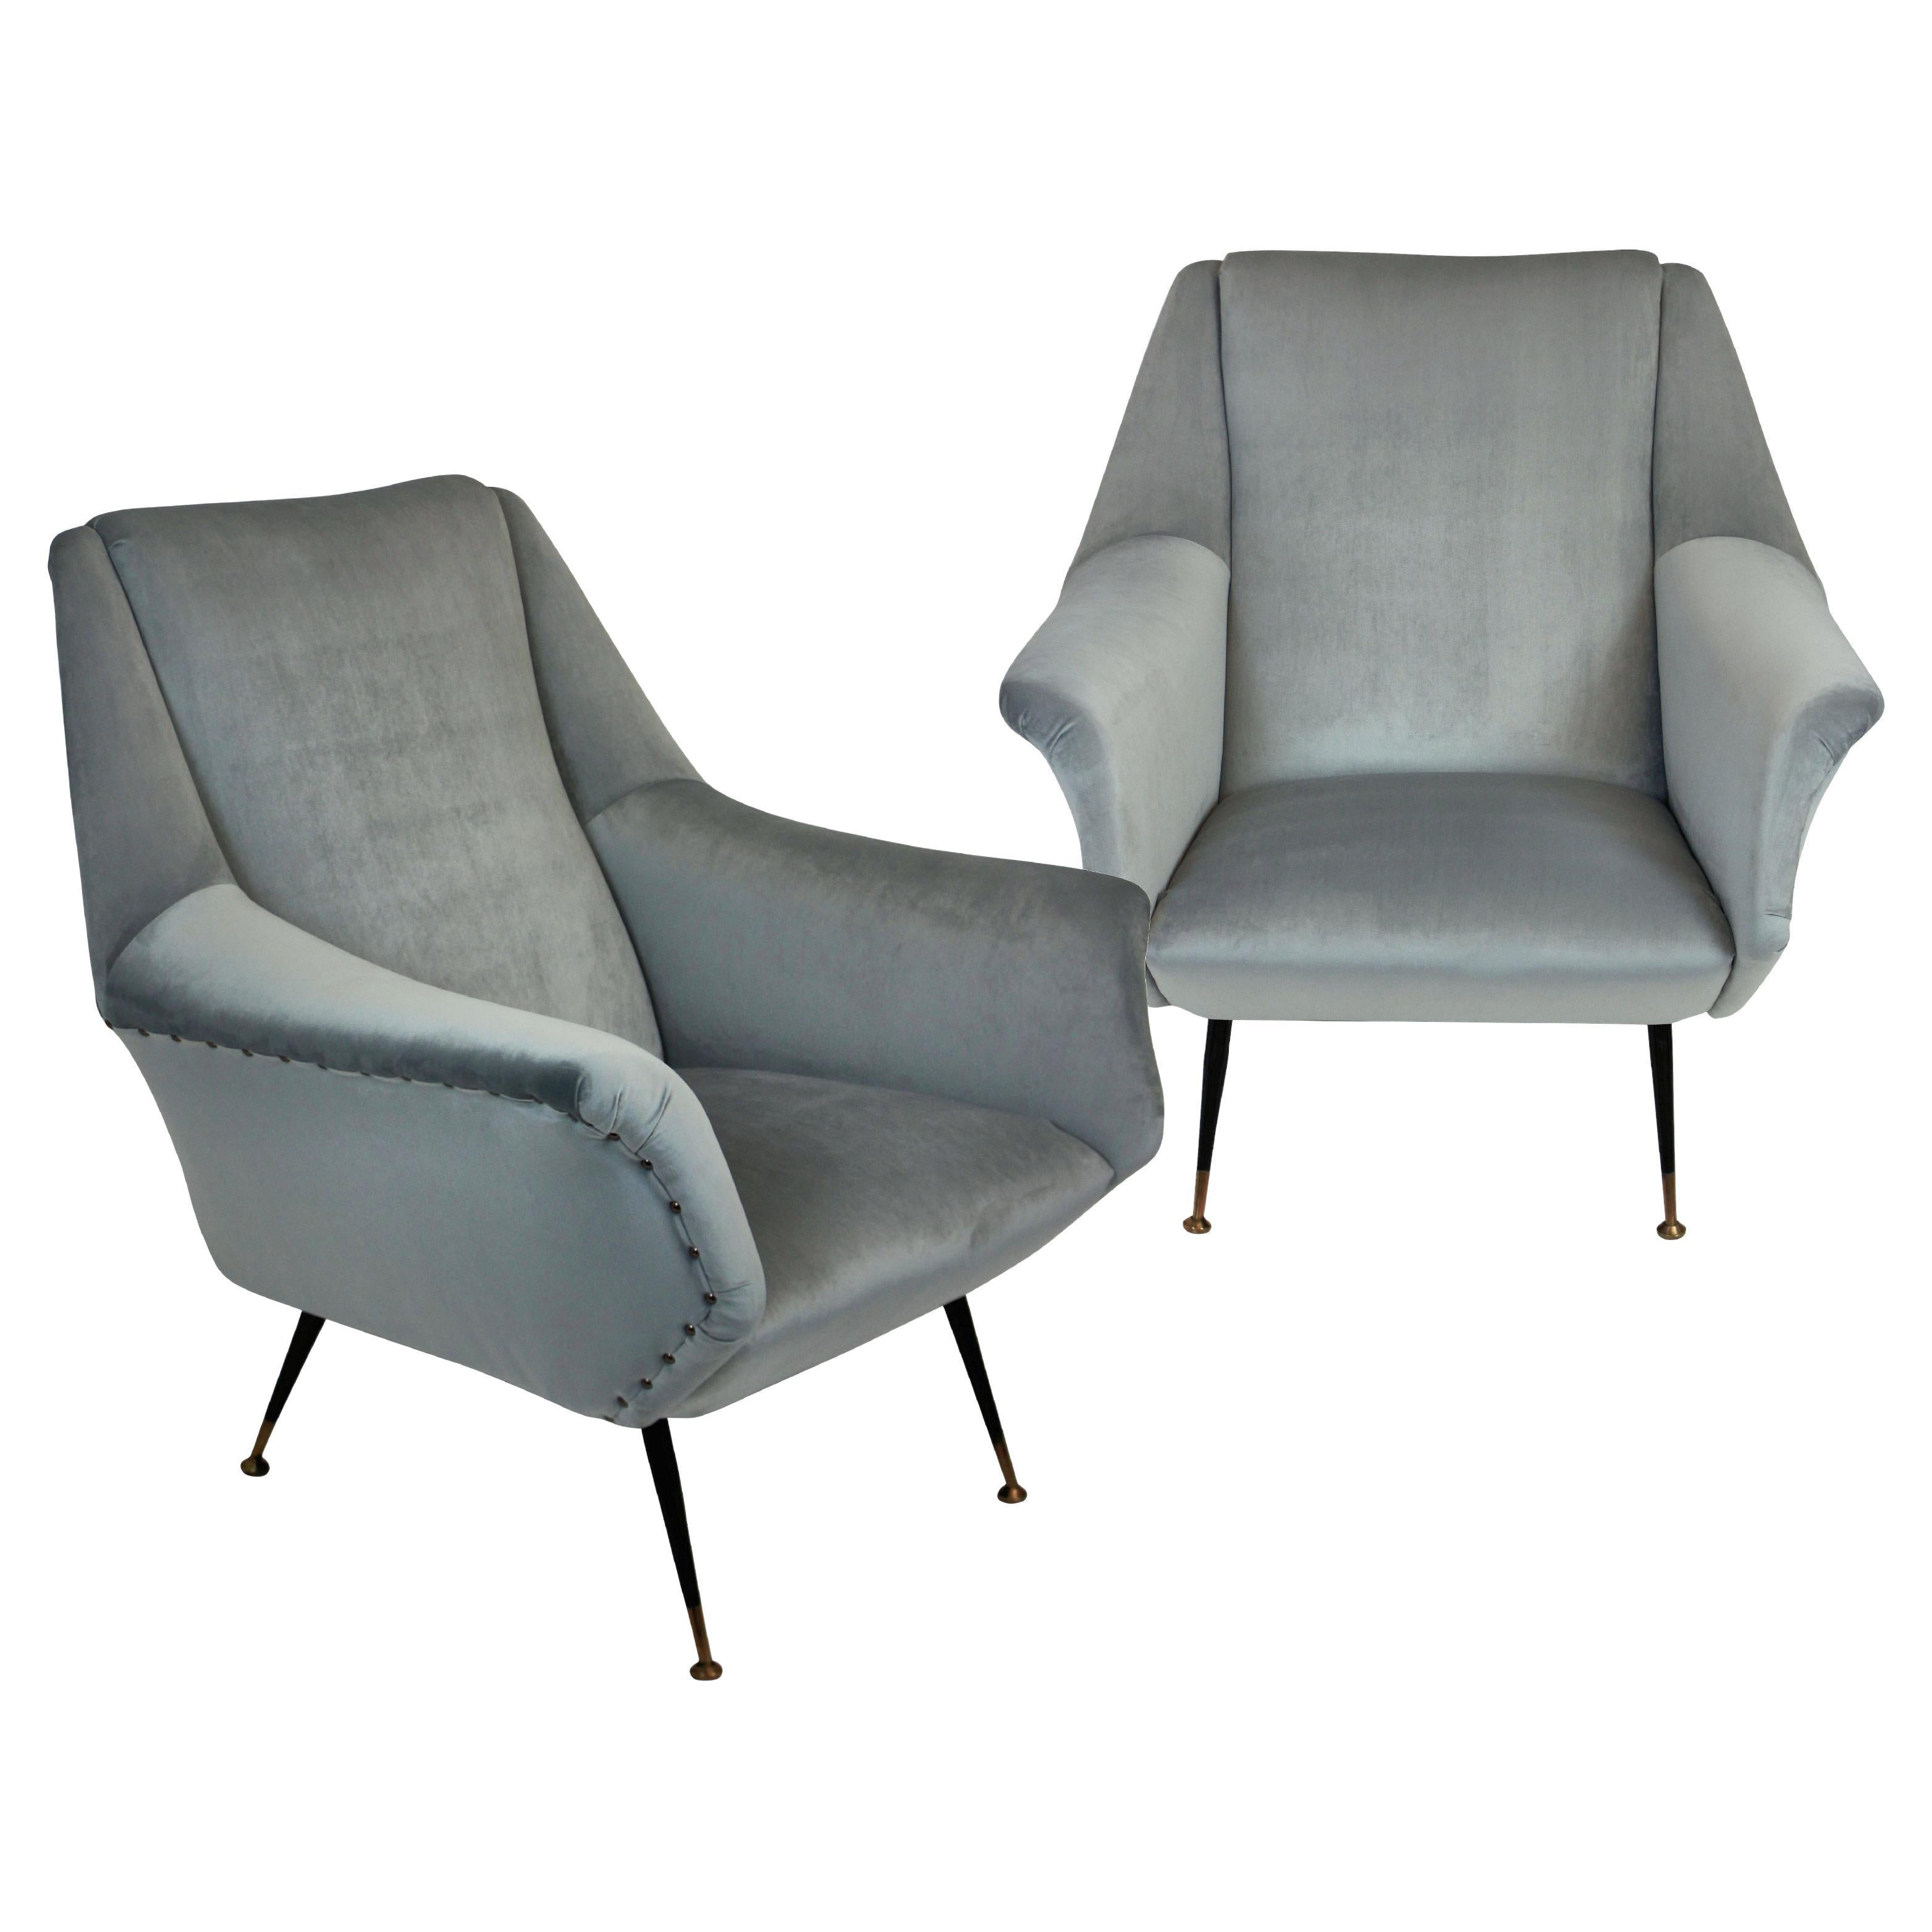 Pair of Midcentury Ponti Style Armchairs For Sale